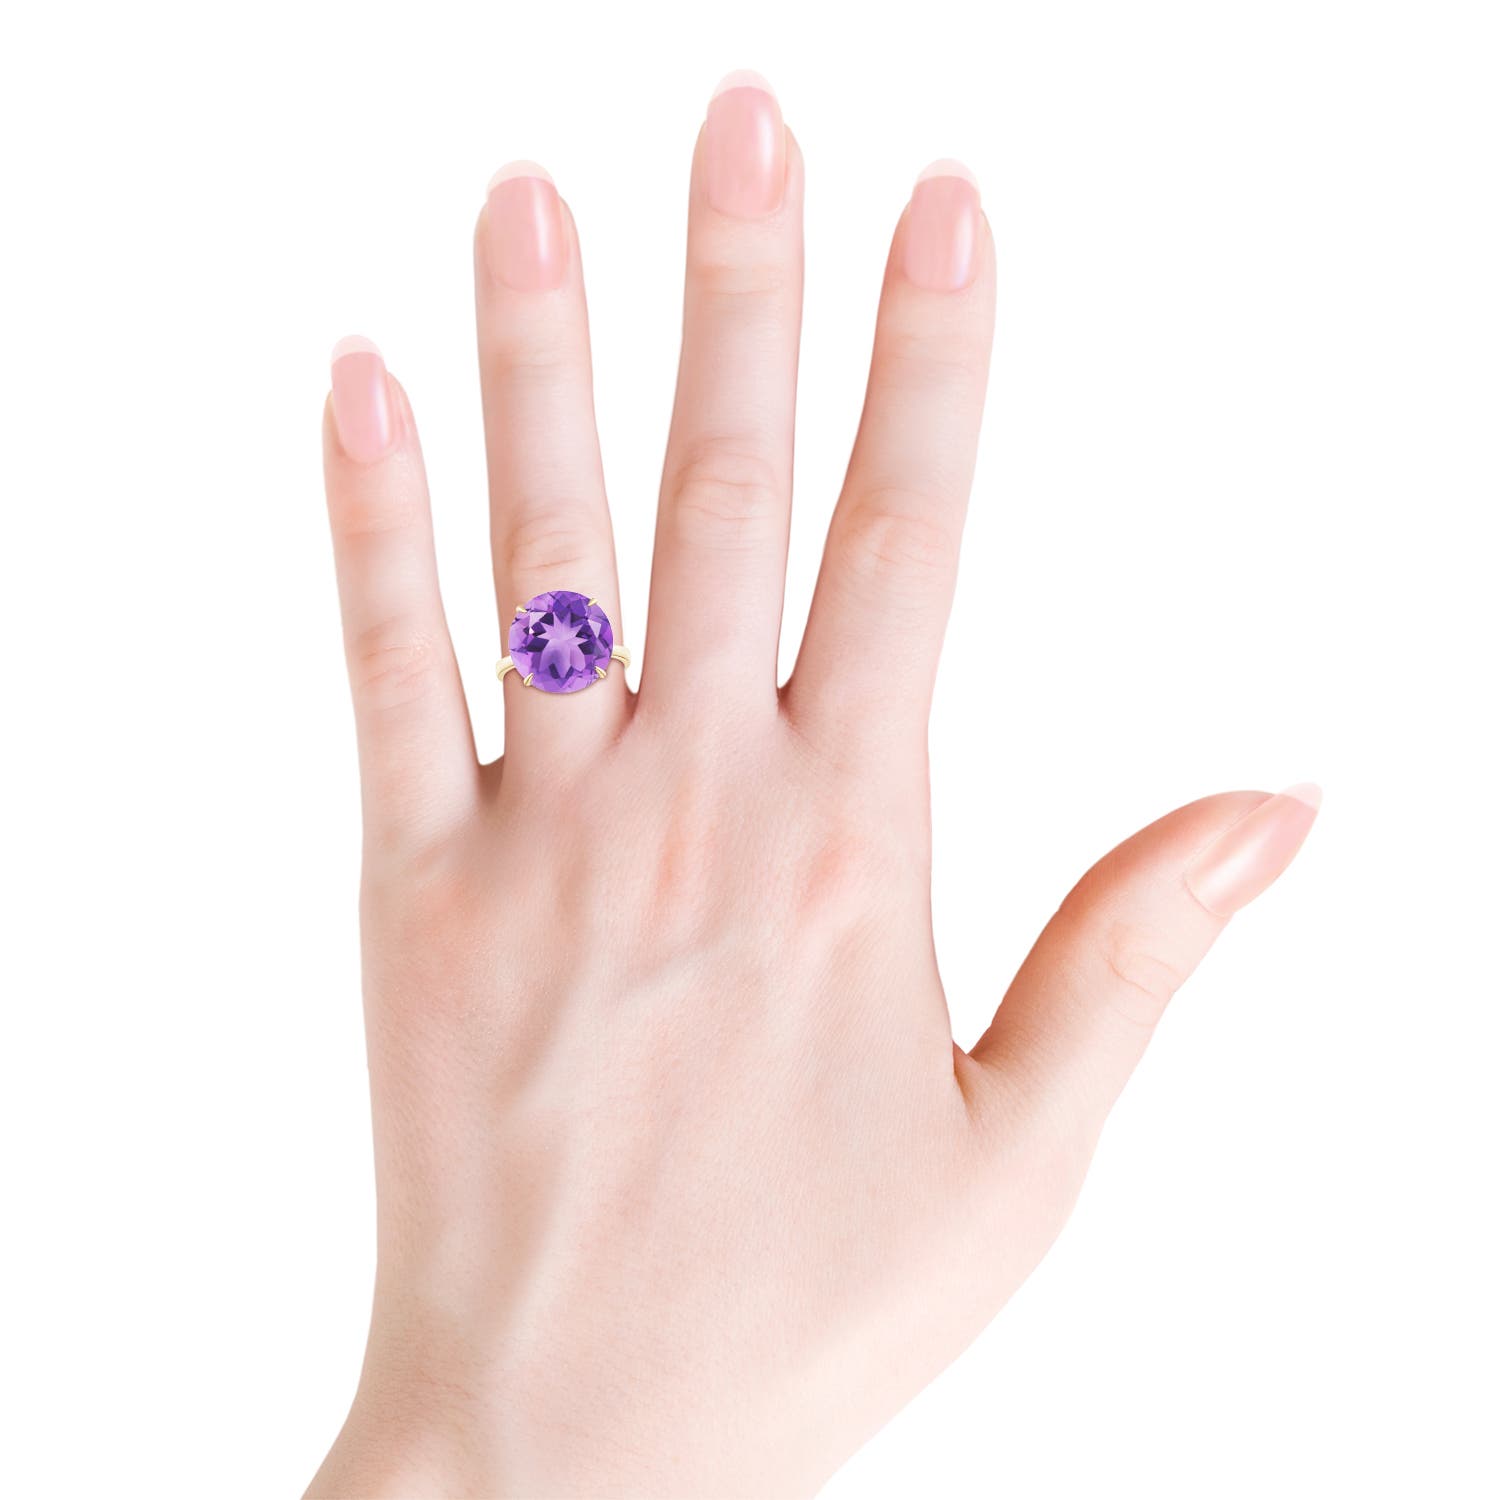 A - Amethyst / 8.5 CT / 14 KT Yellow Gold